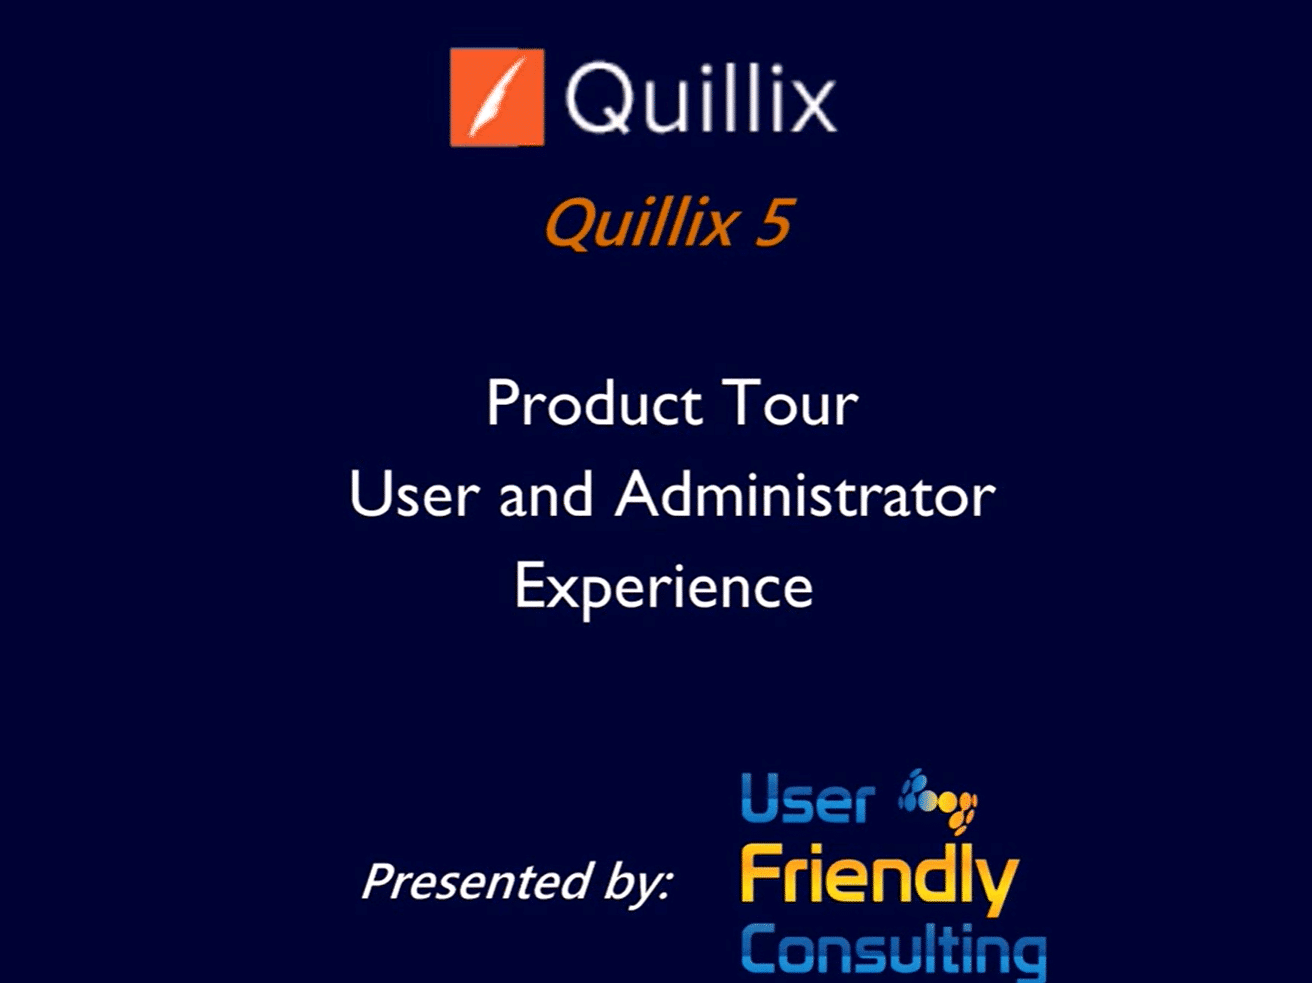 Thumbnail for Quillix 5 Product Tour video